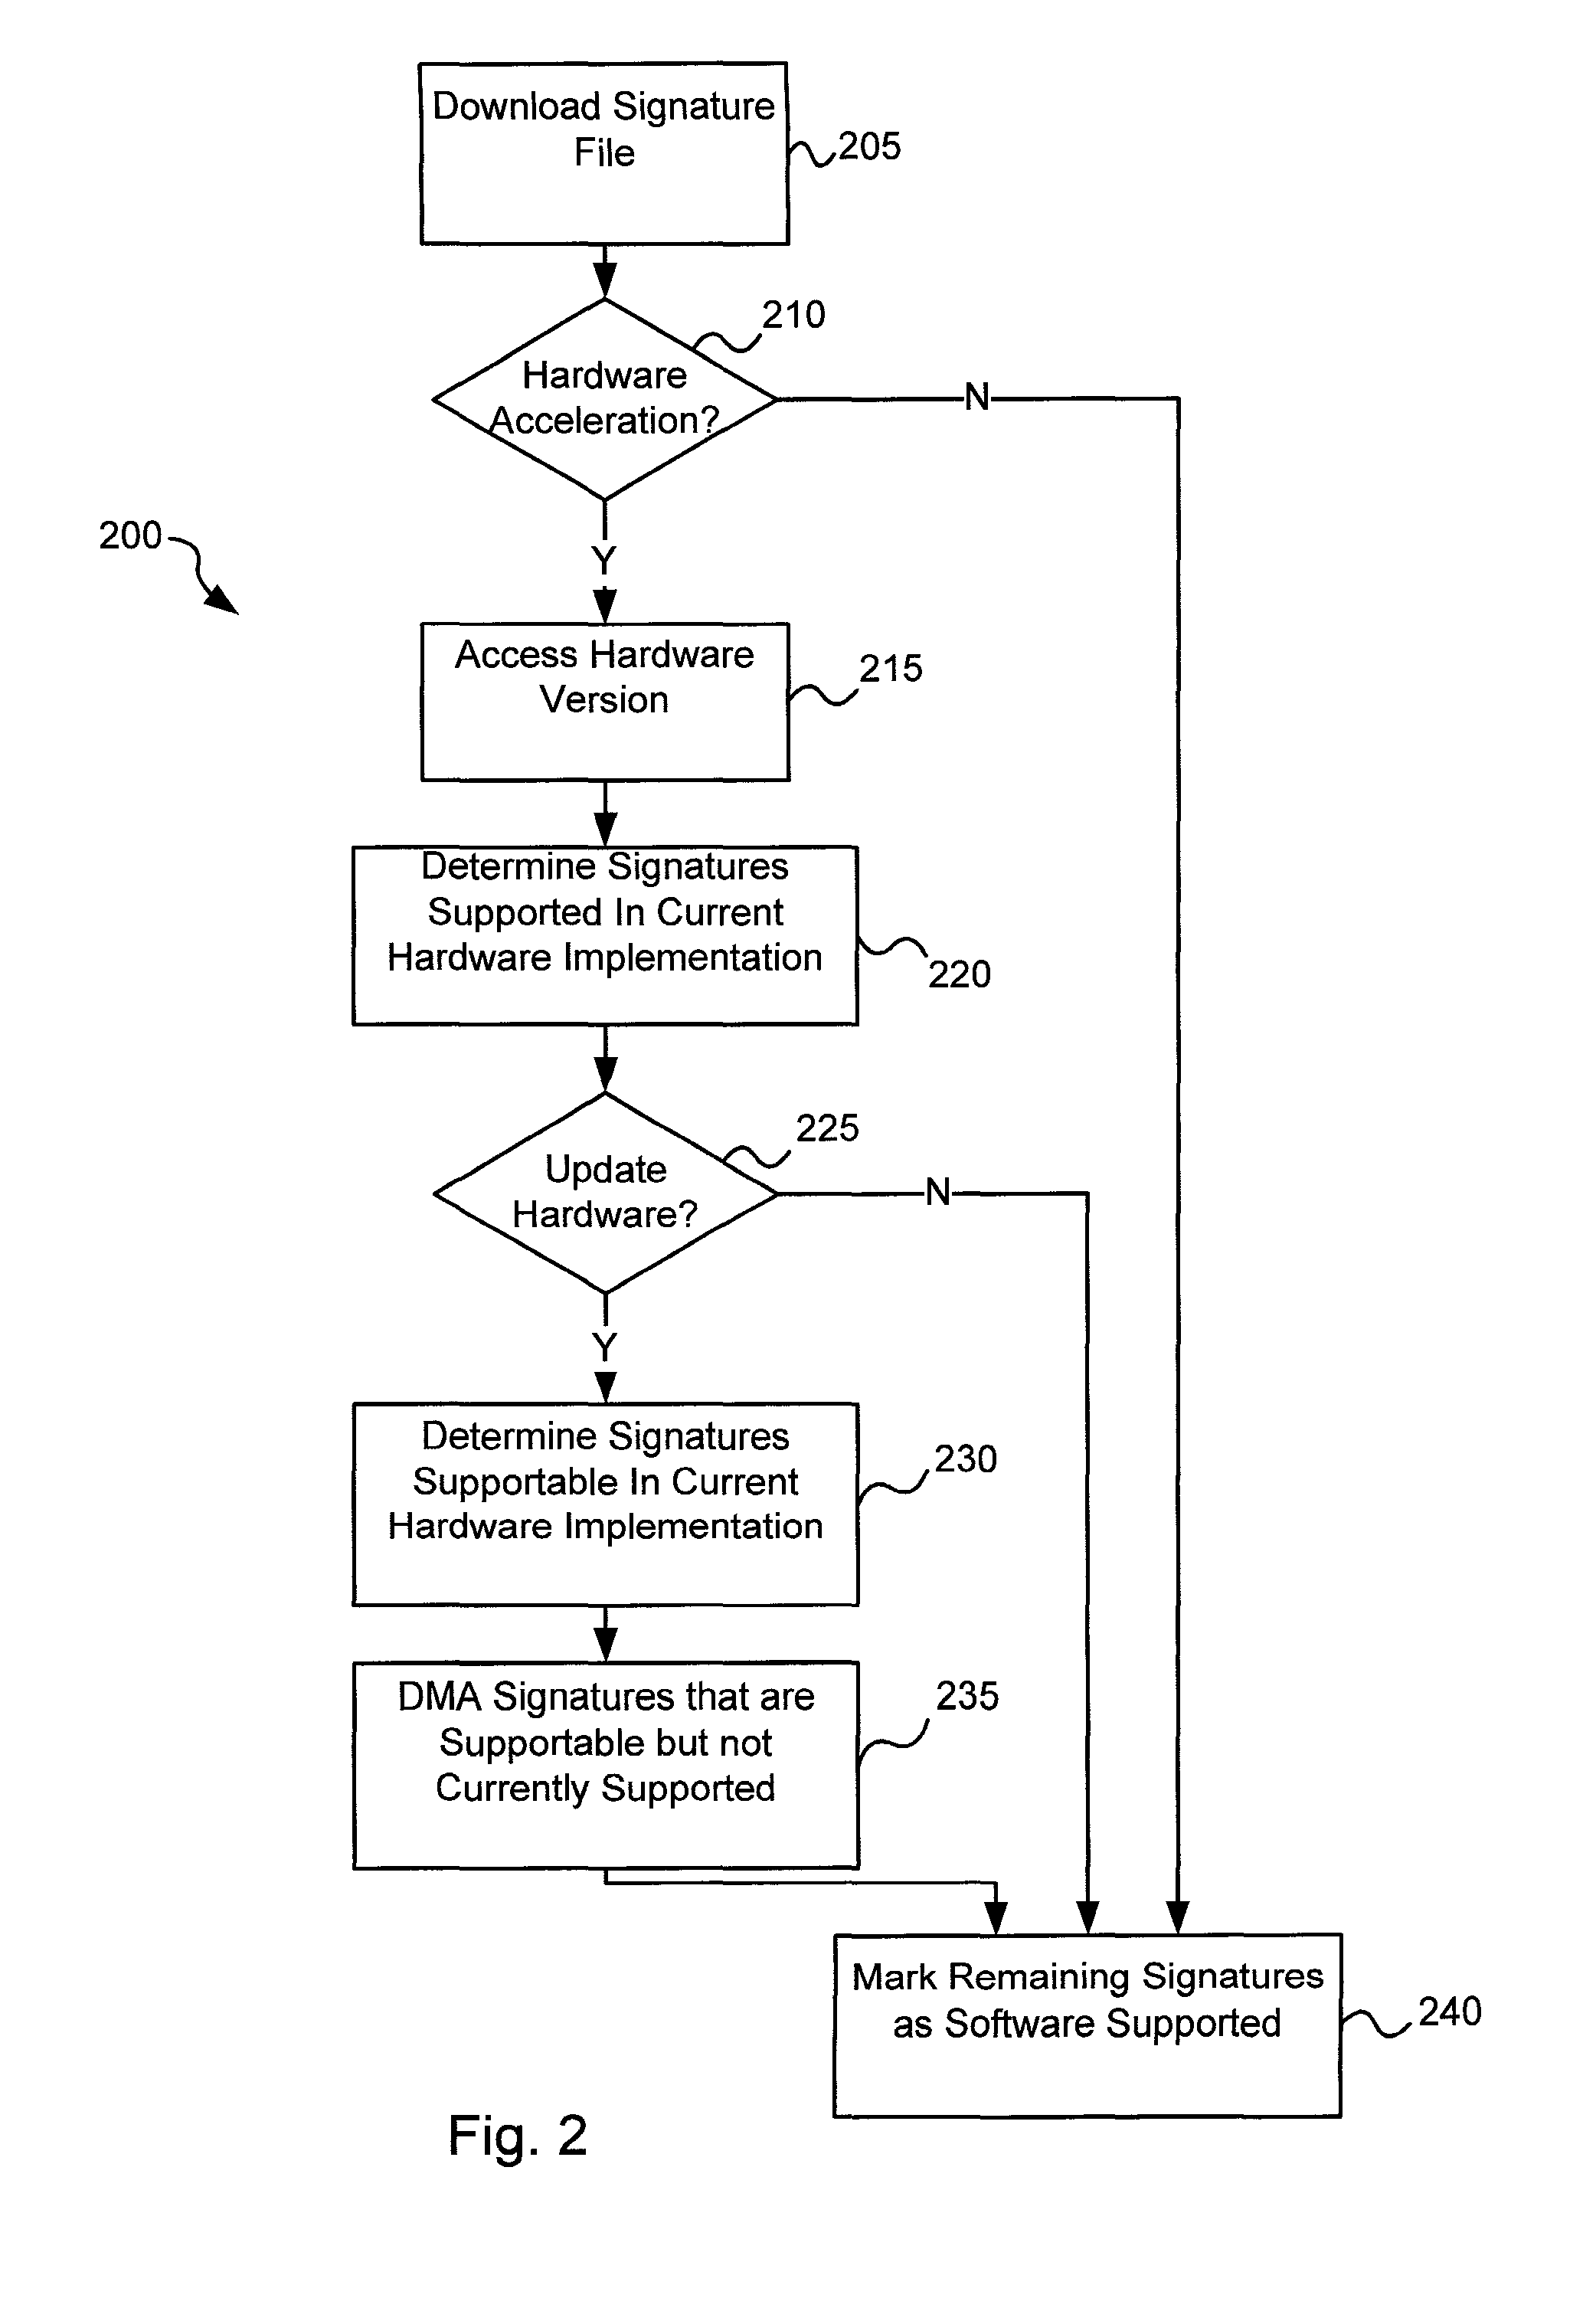 Software-hardware partitioning in a virus processing system